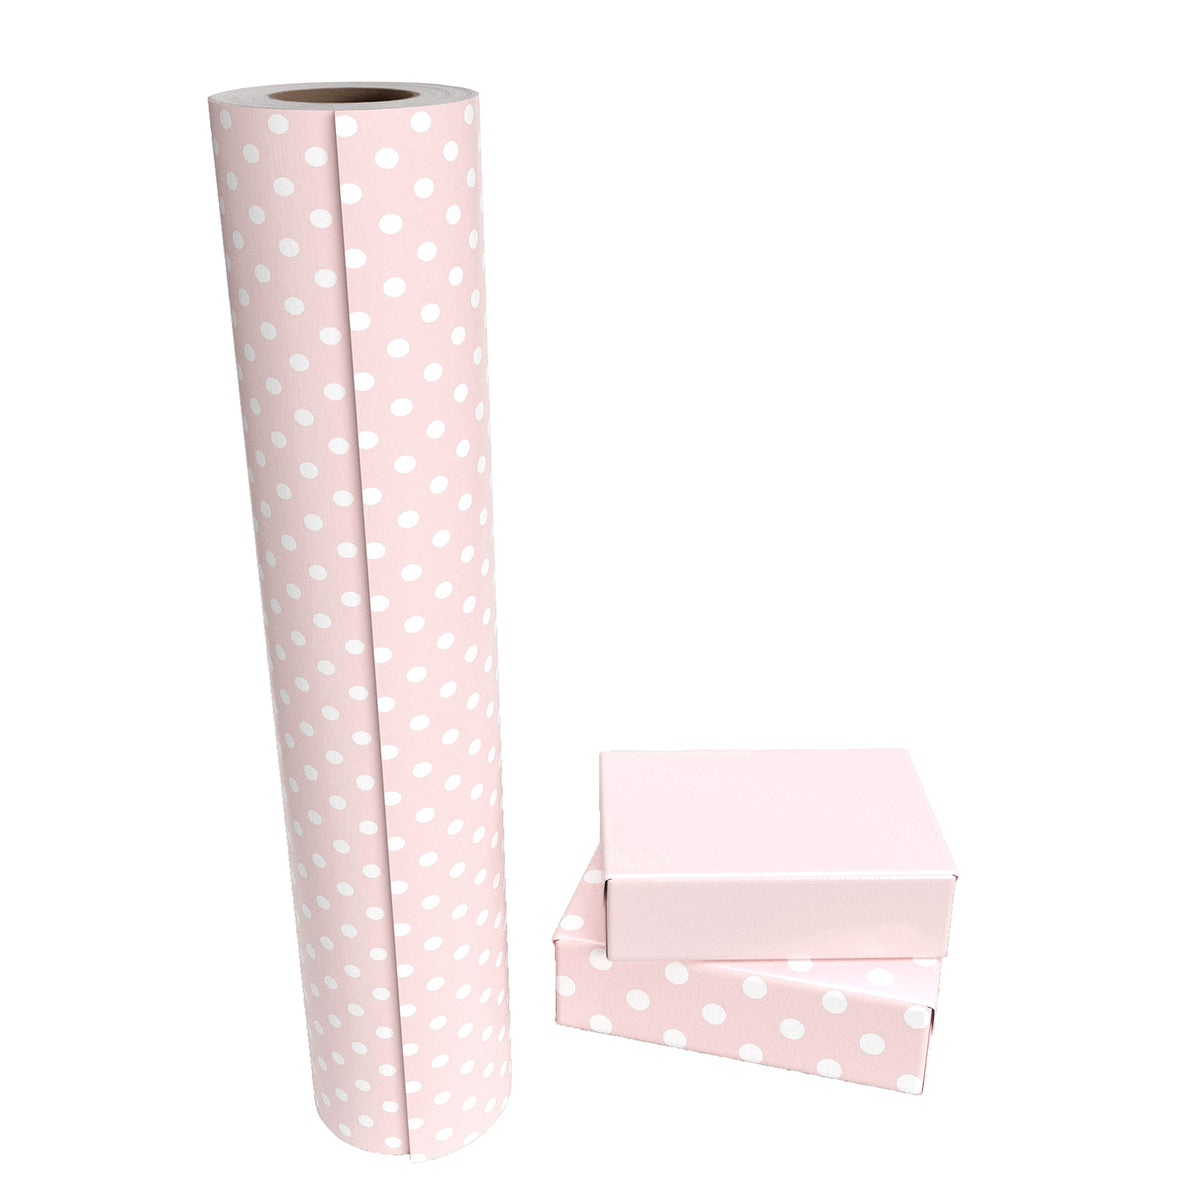 20ct Foil Dots With Foil Dots Gift Wrap Tissue Gray/pink/white